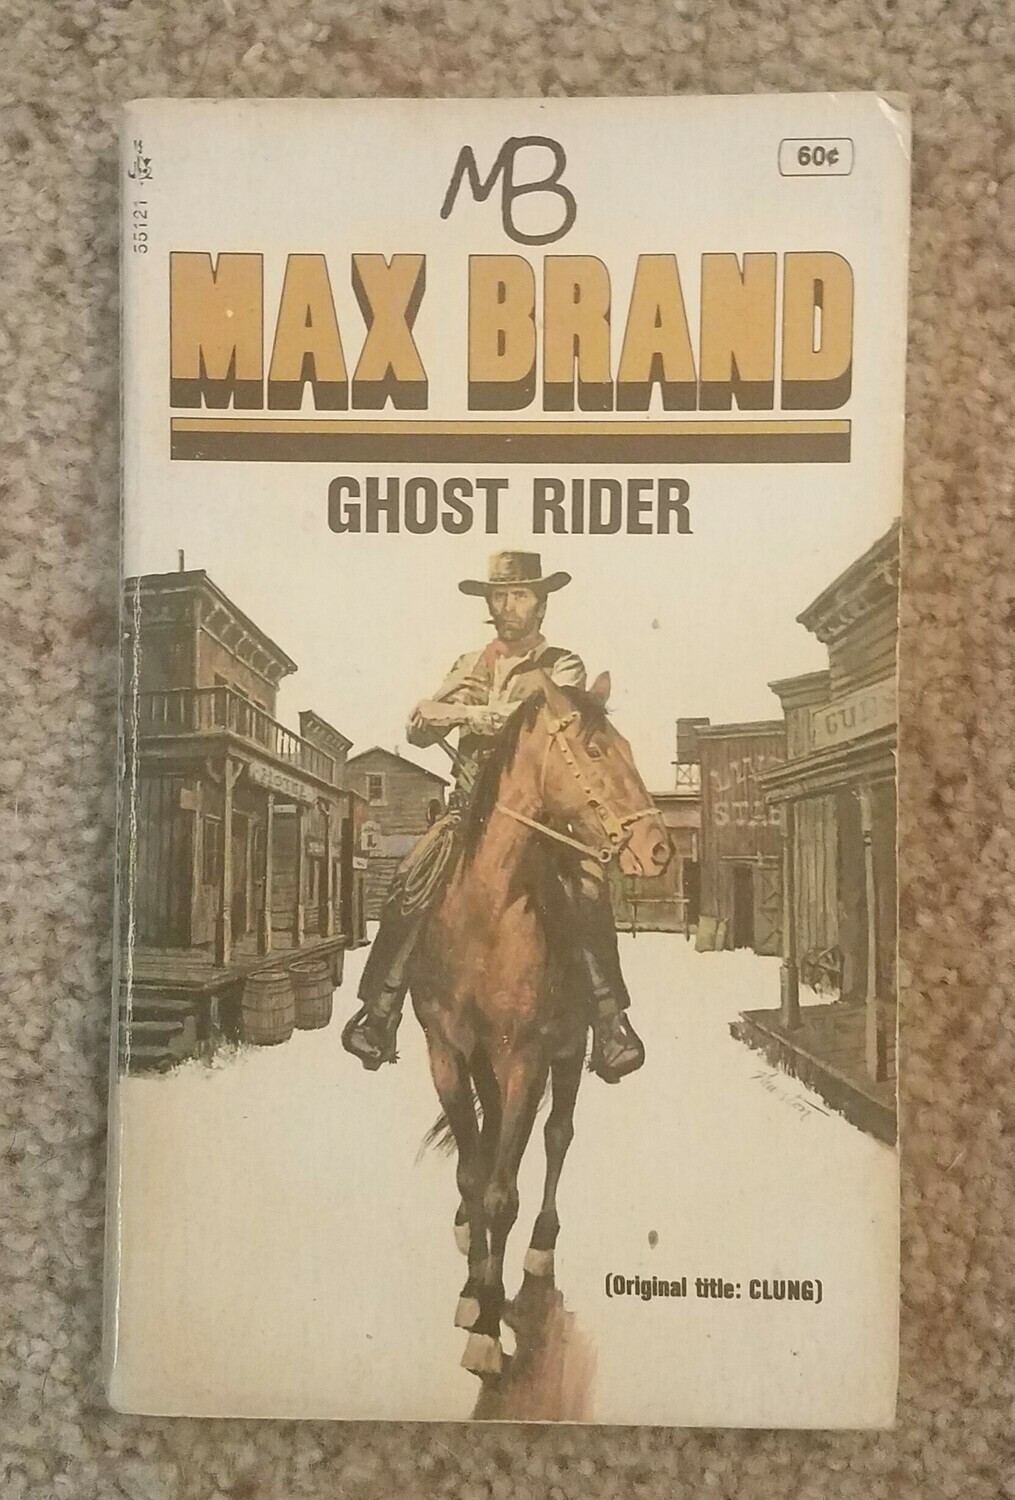 Ghost Rider by Max Brand